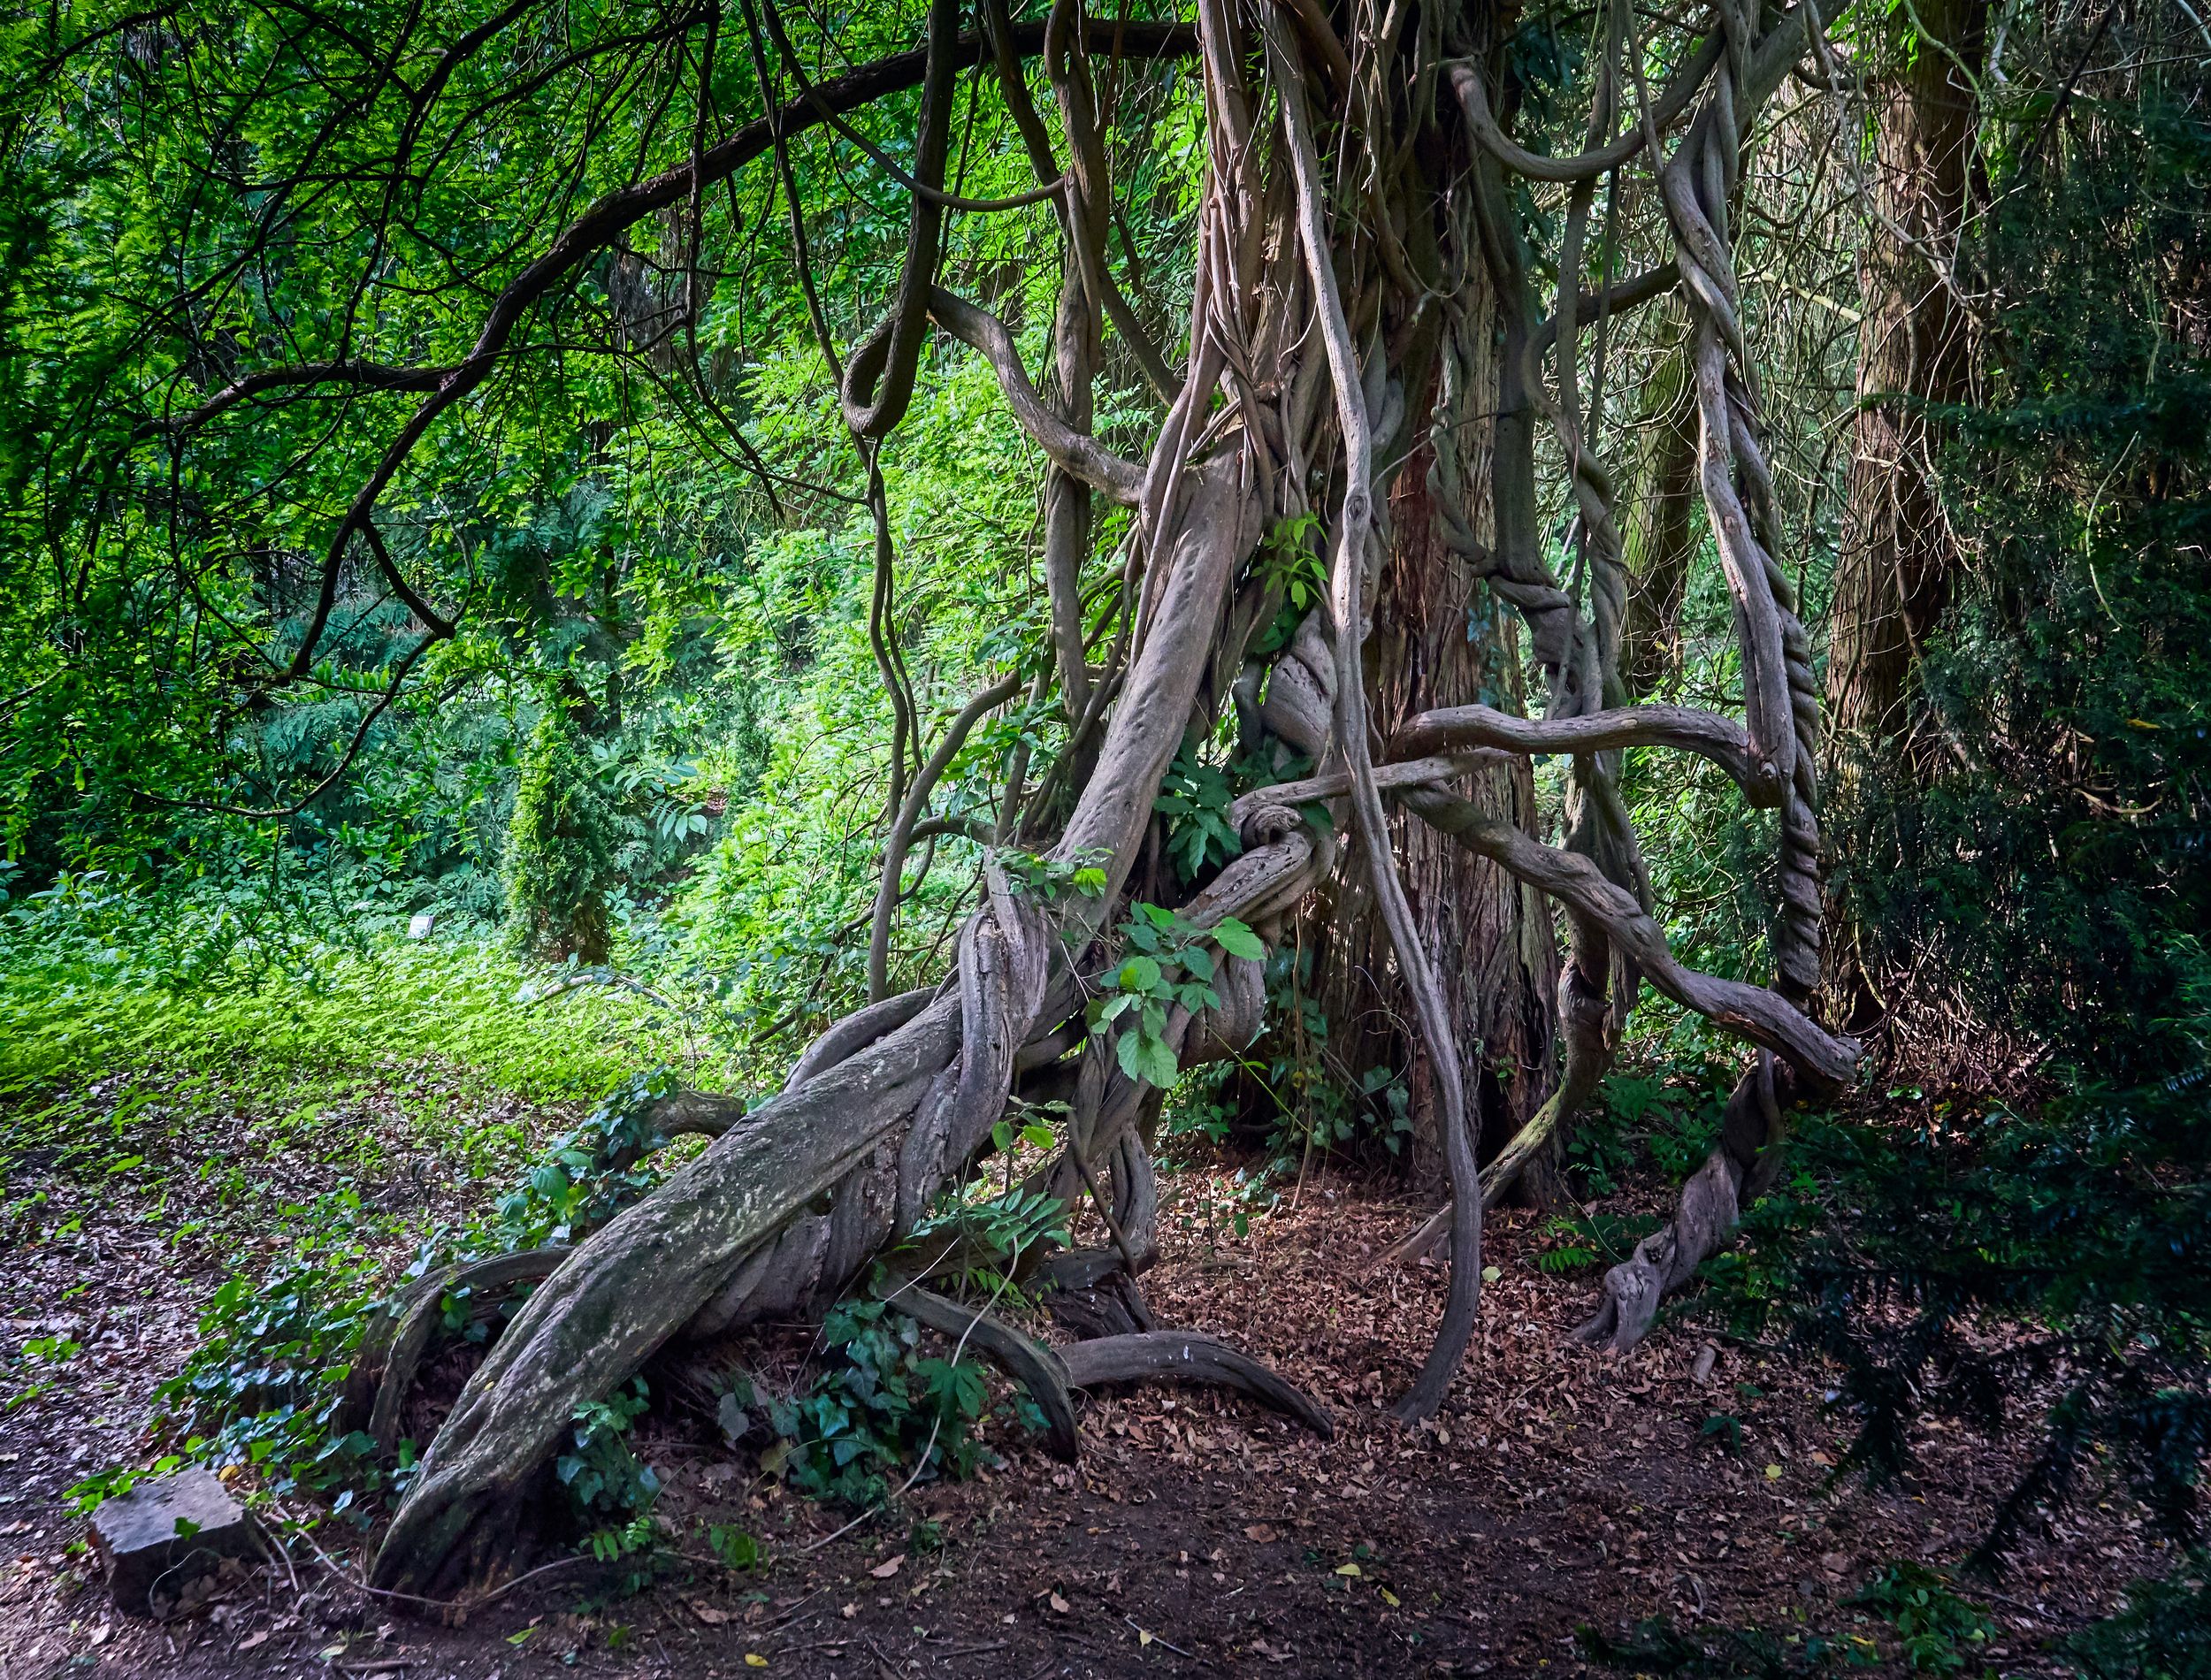 An image of vines climbing a tree